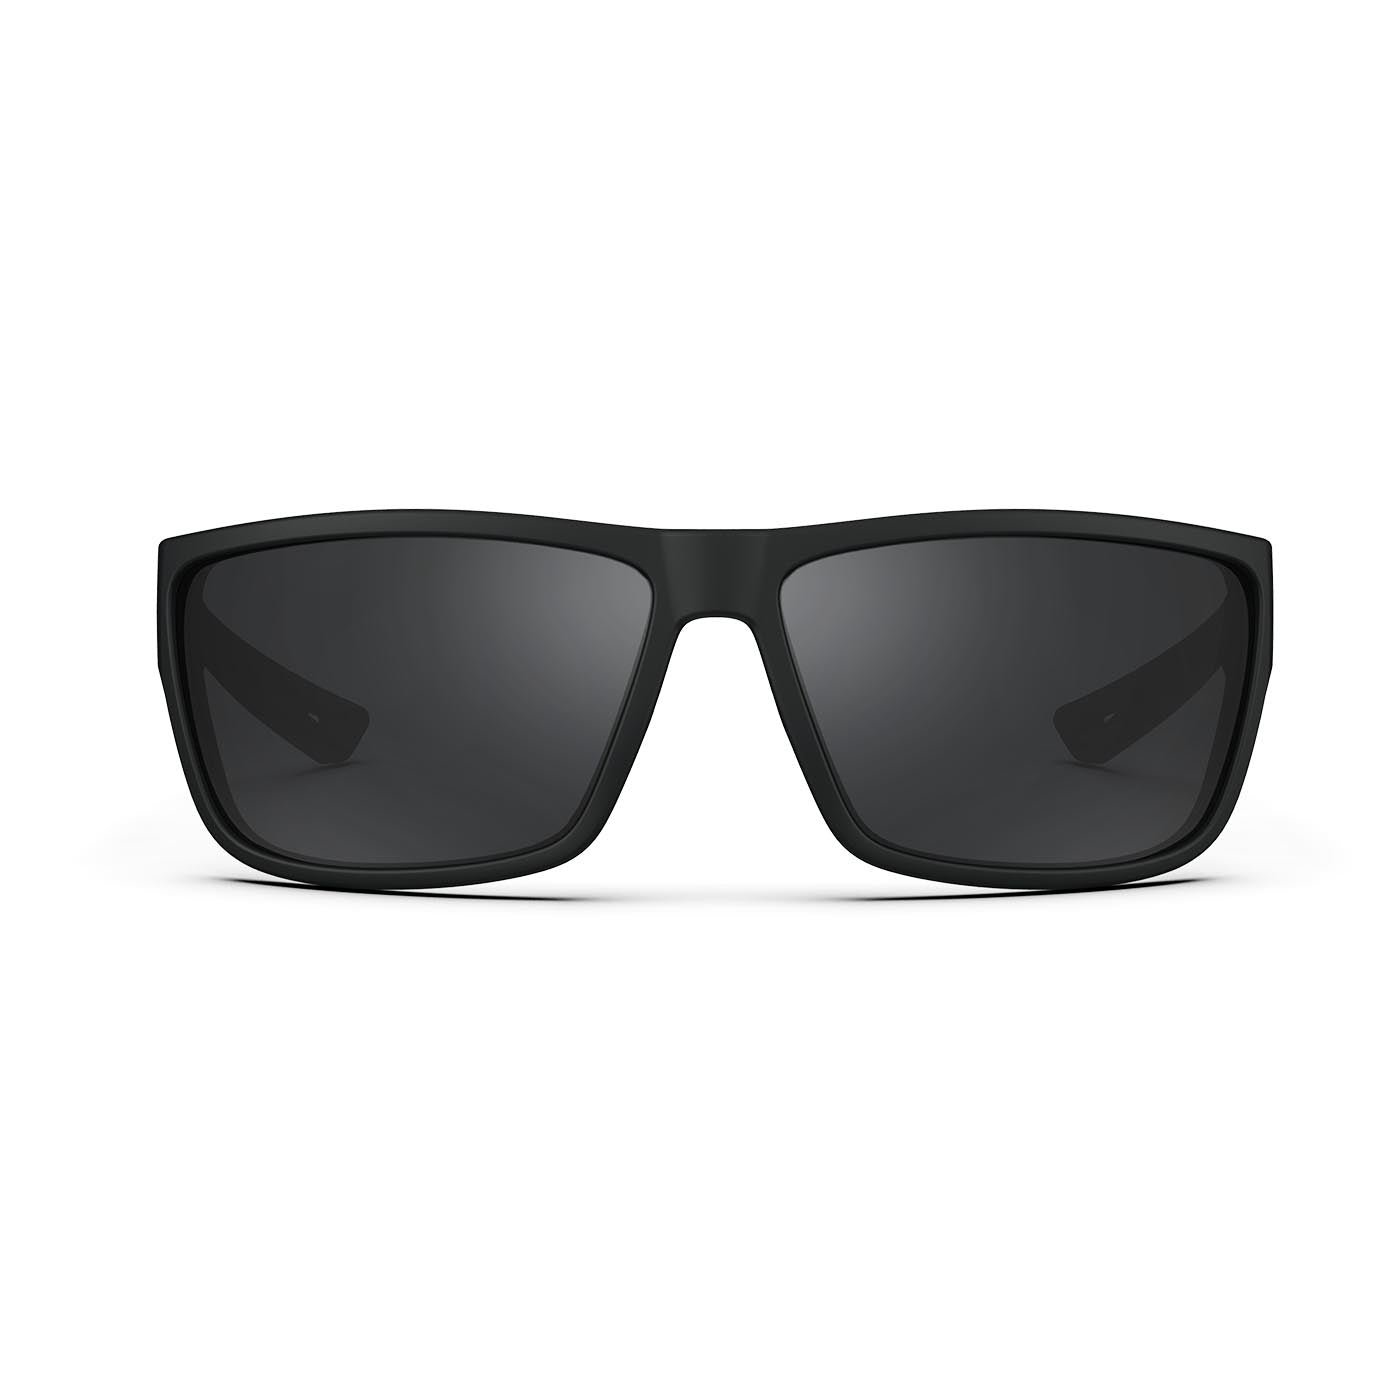 Unique Polarized Sports Sunglasses for Men and Women With Lifetime